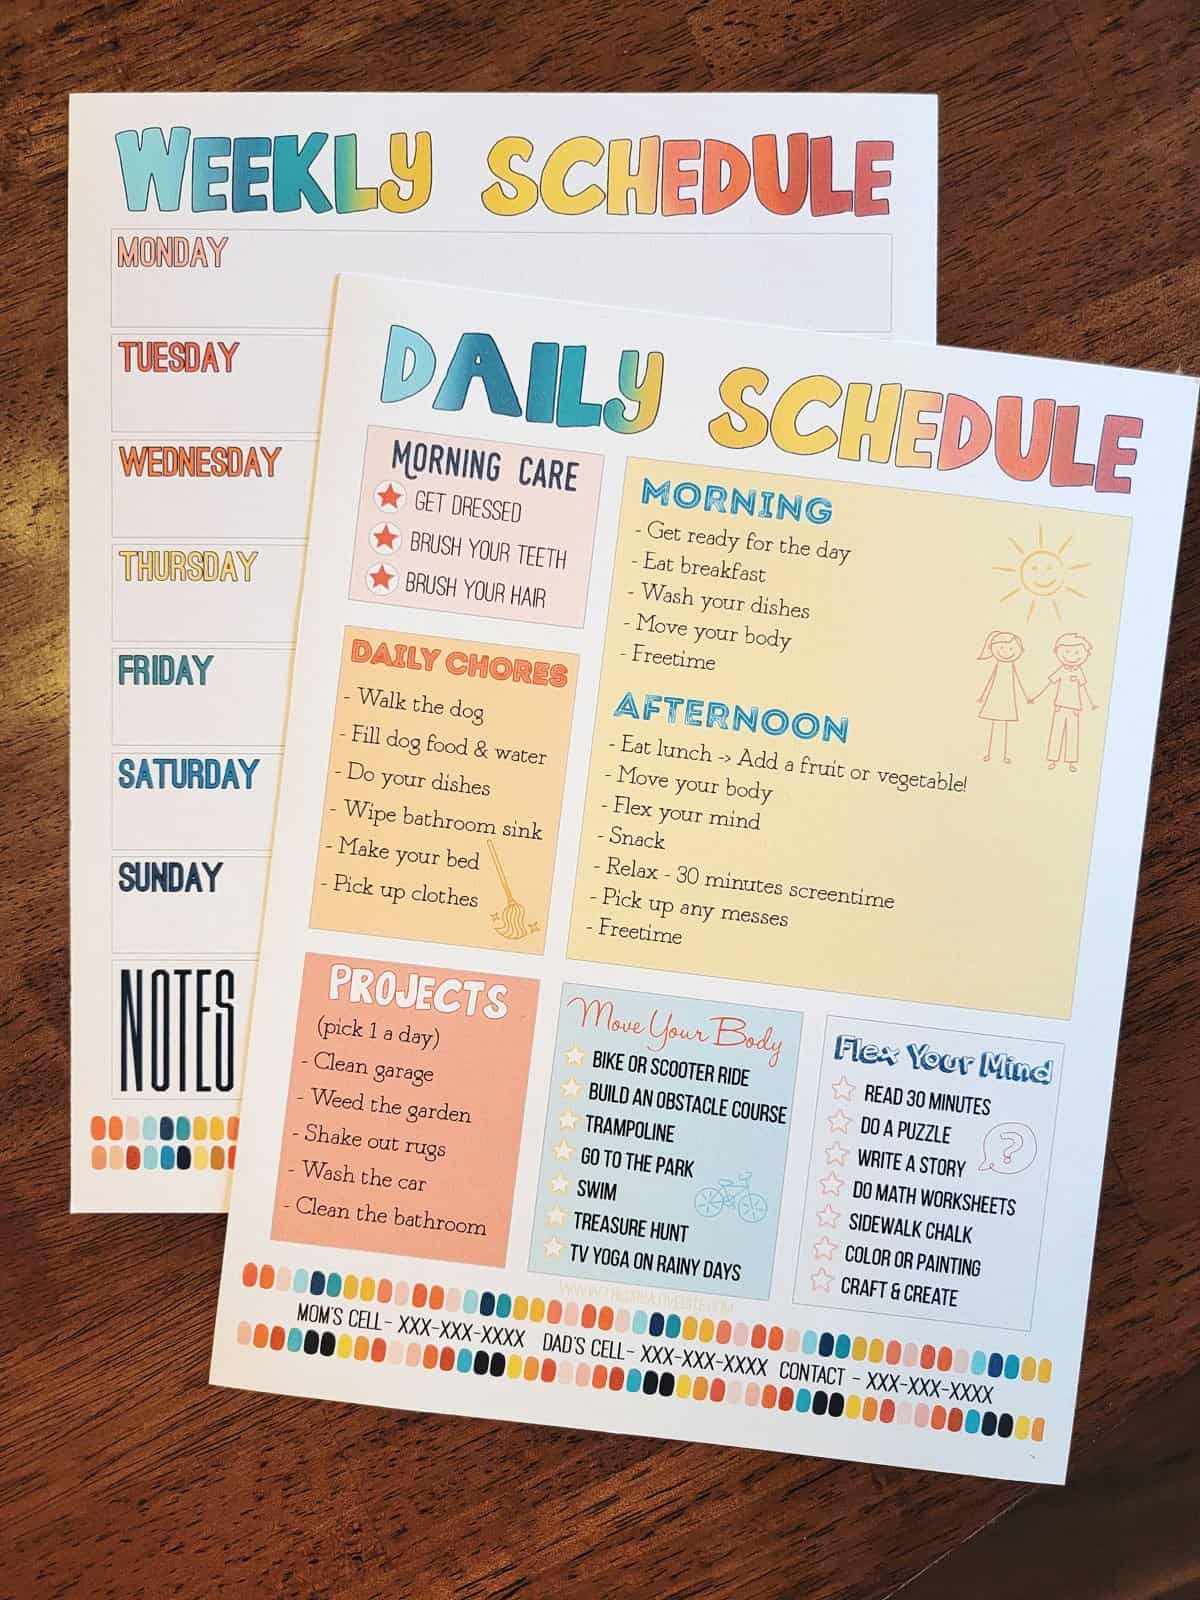 https://www.thecreativebite.com/wp-content/uploads/2022/06/Free-Printable-Kids-Daily-Weekly-Schedules-Picture-copy.jpg